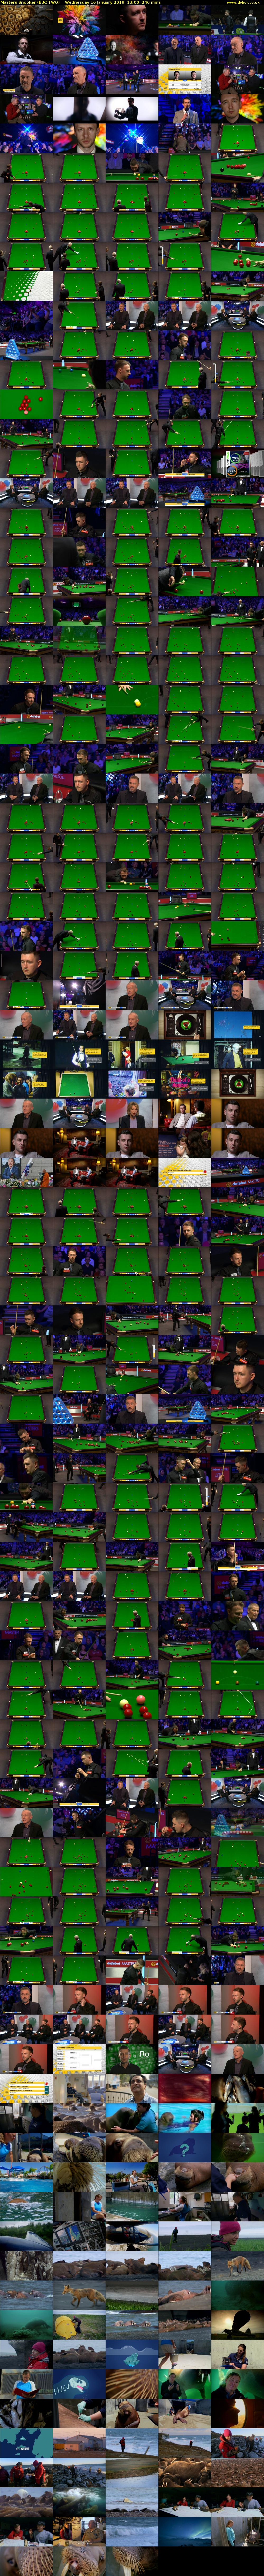 Masters Snooker (BBC TWO) Wednesday 16 January 2019 13:00 - 17:00